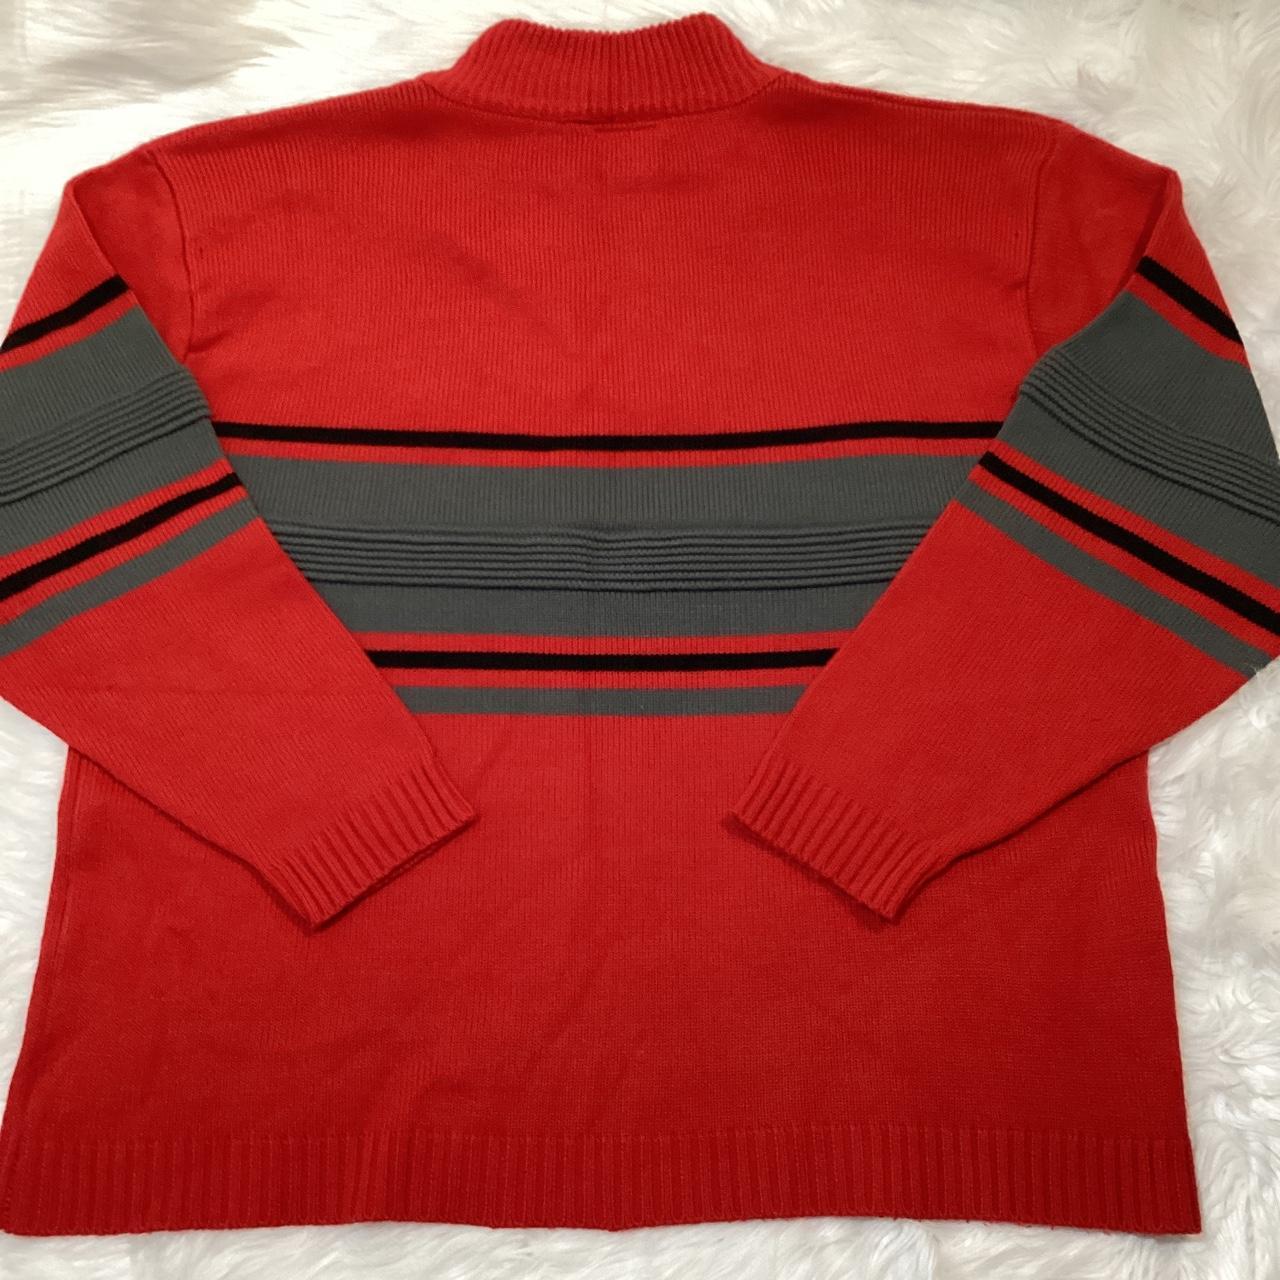 Timberland Men's Red and Grey Jumper (4)